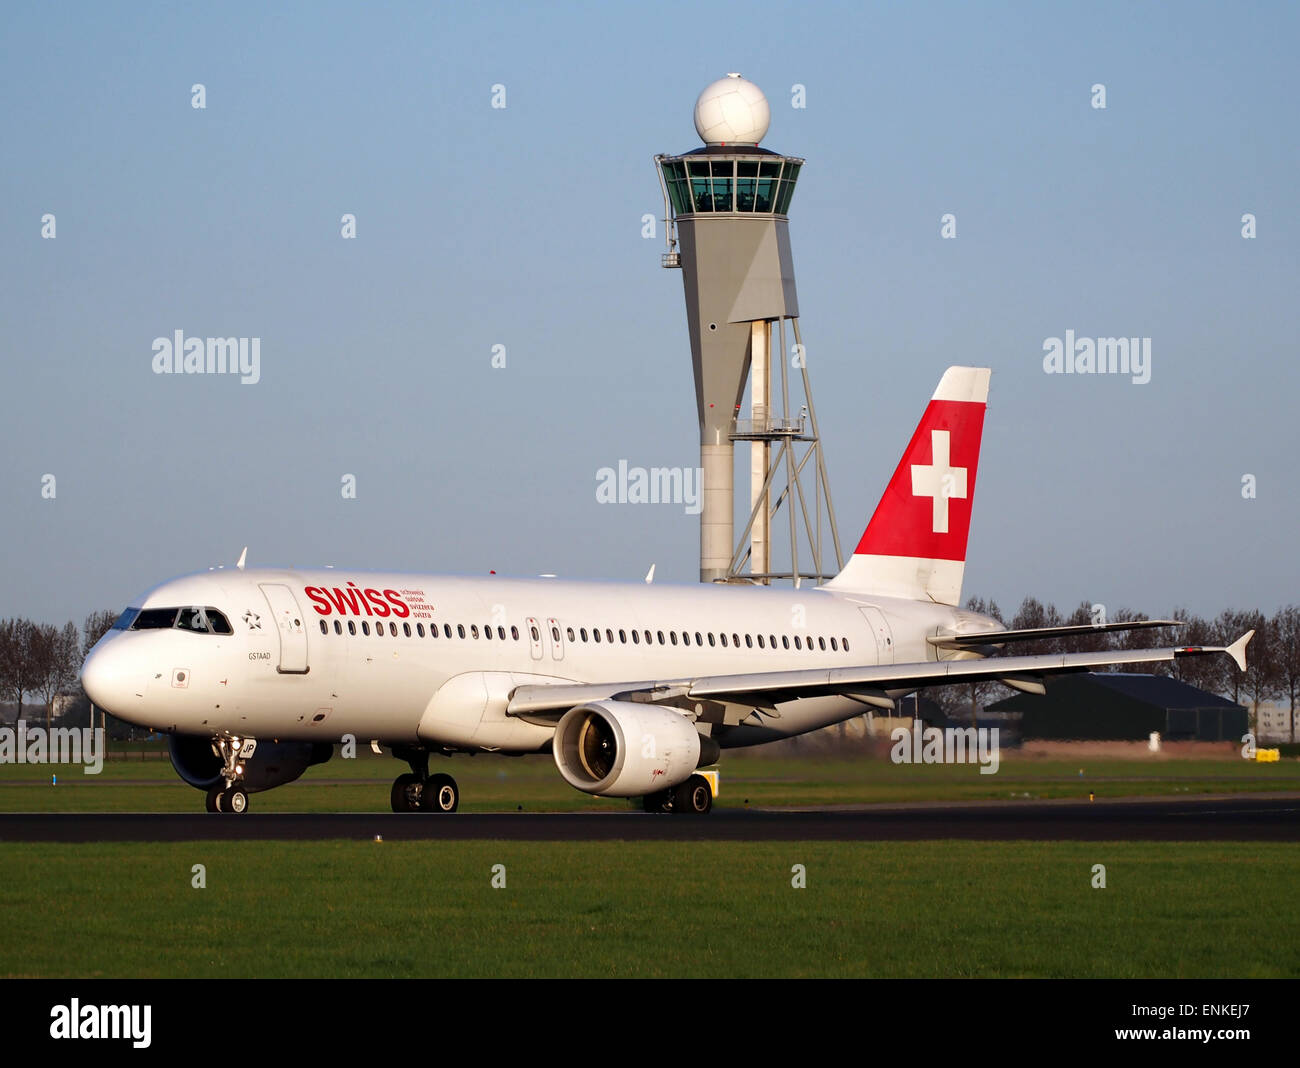 HB-IJP Swiss Airbus A320-214 - cn 681 takeoff from Polderbaan, Schiphol (AMS - EHAM) at sunset, Stock Photo